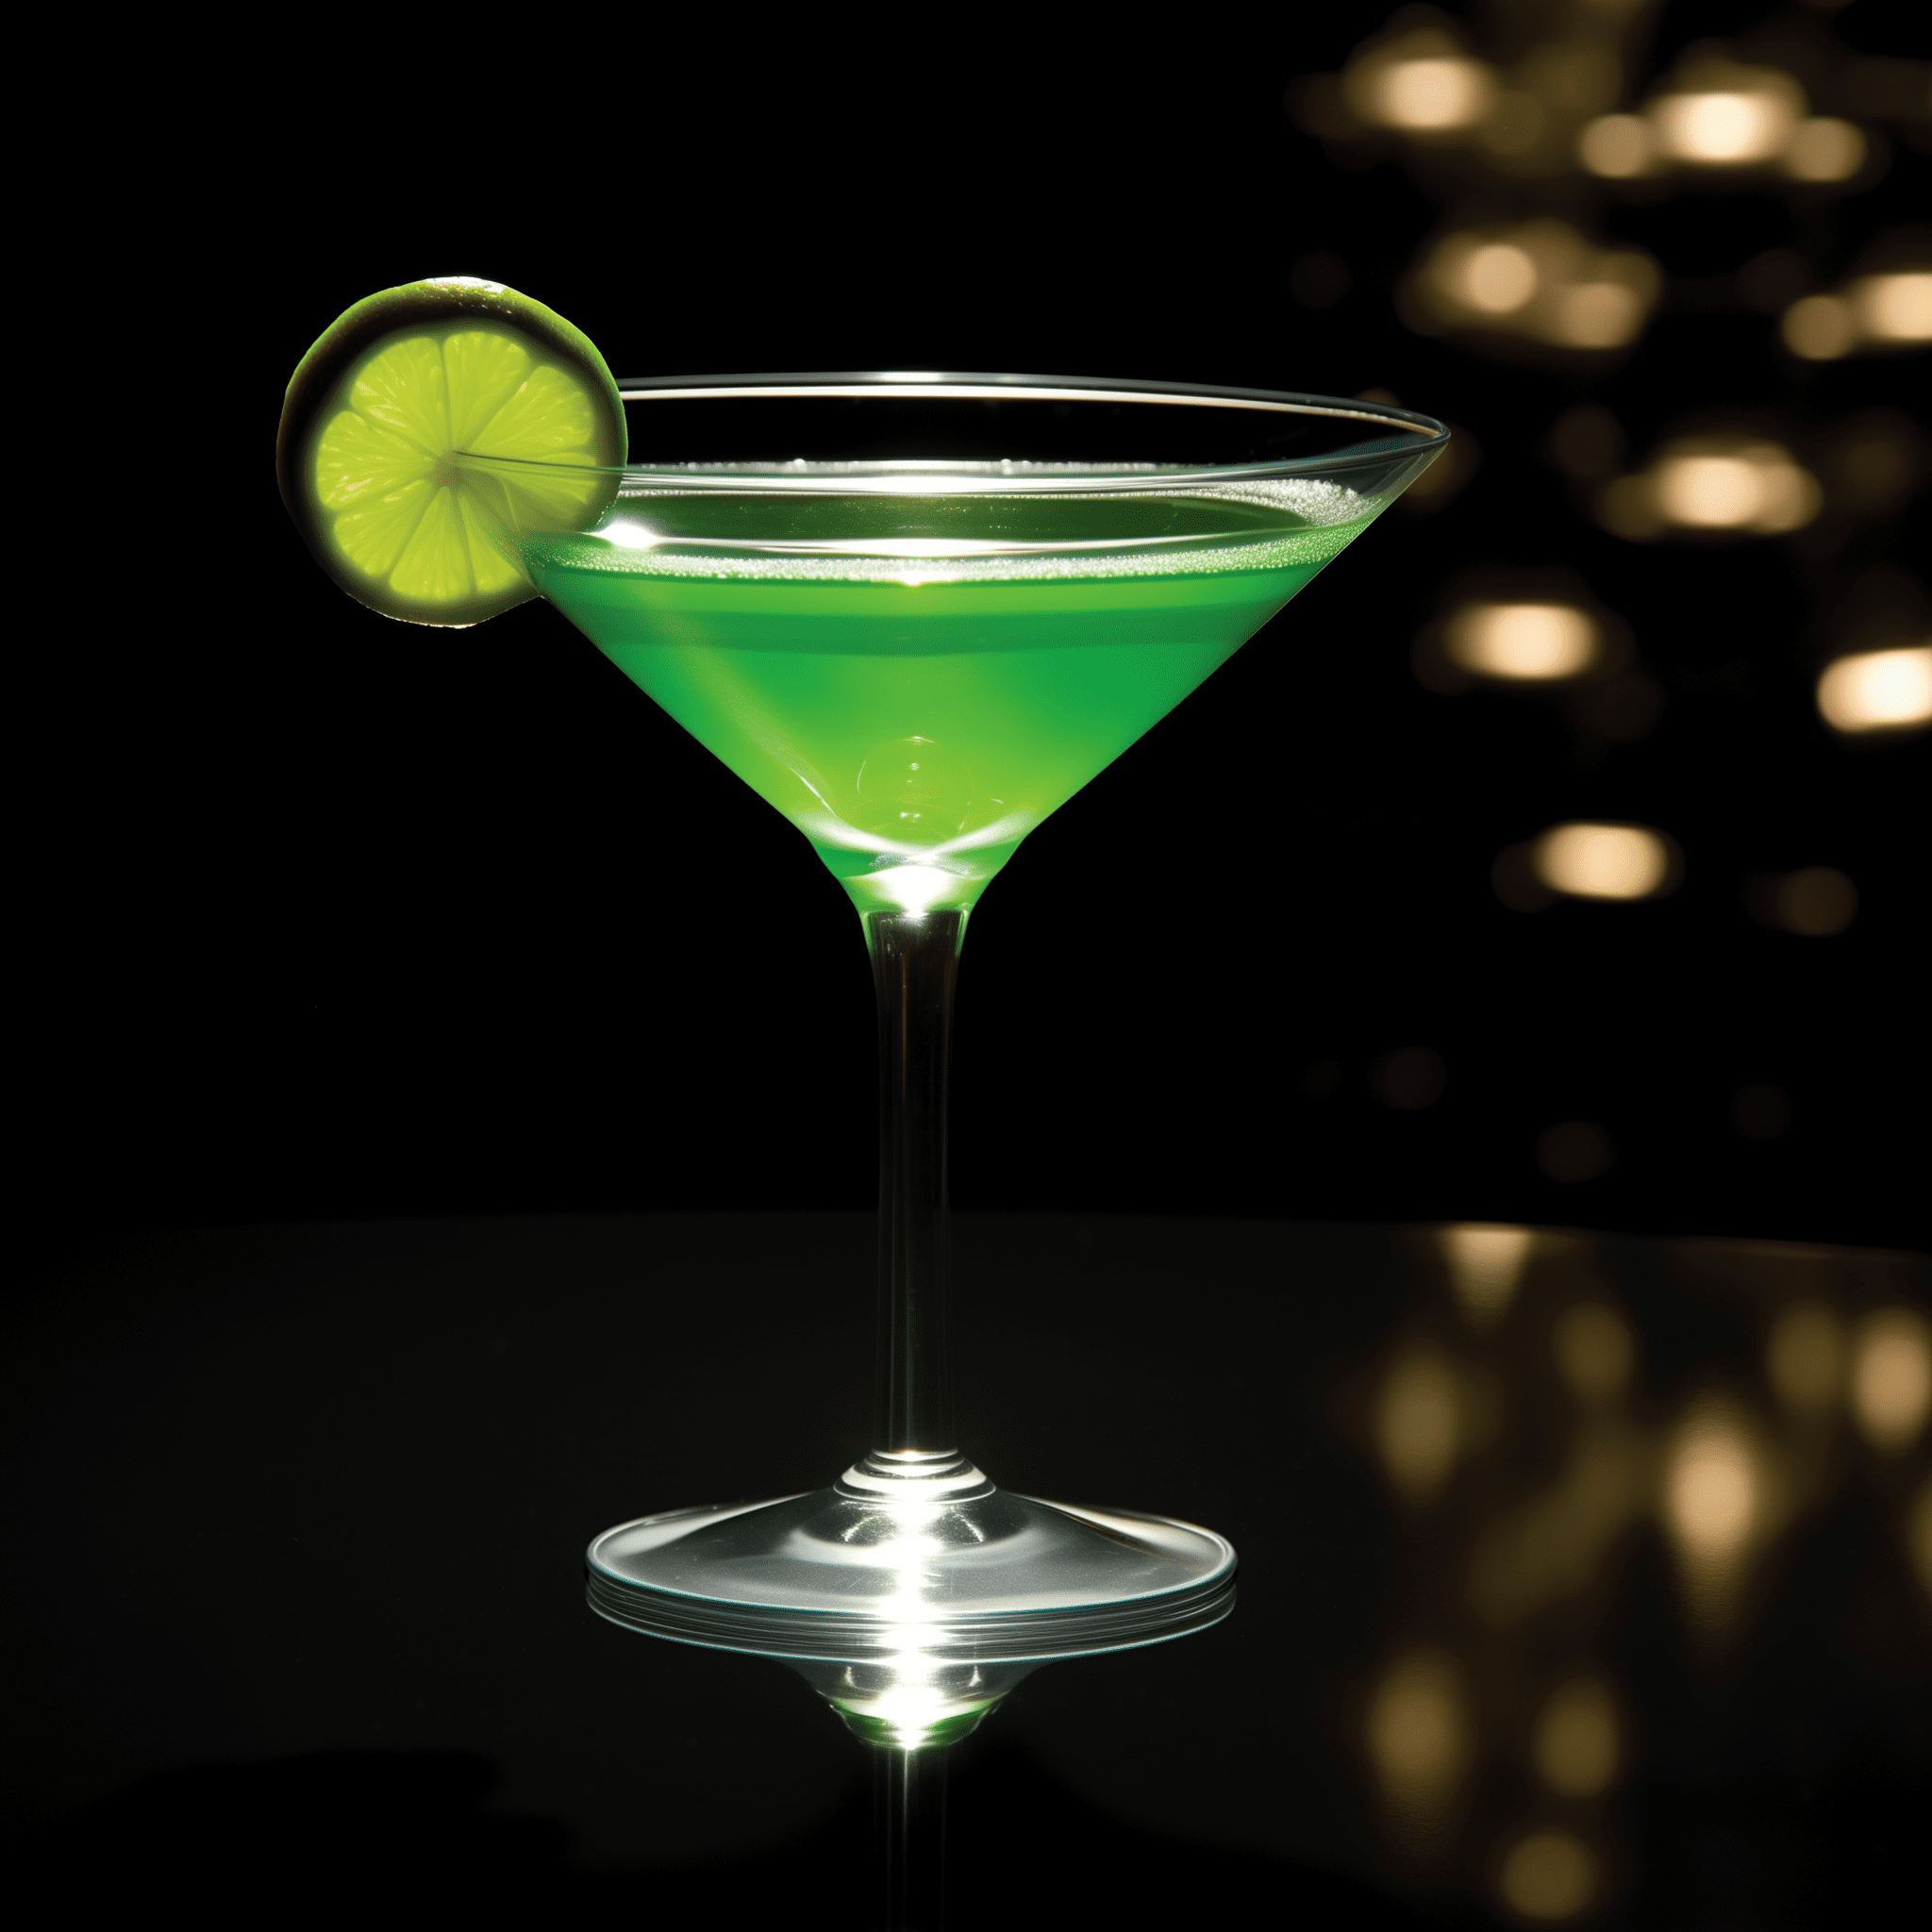 Area 51 Cocktail Recipe - The Area 51 cocktail is a sweet and fruity cocktail with a strong kick. It has a vibrant tropical flavor with a hint of citrus and a strong, smooth finish.